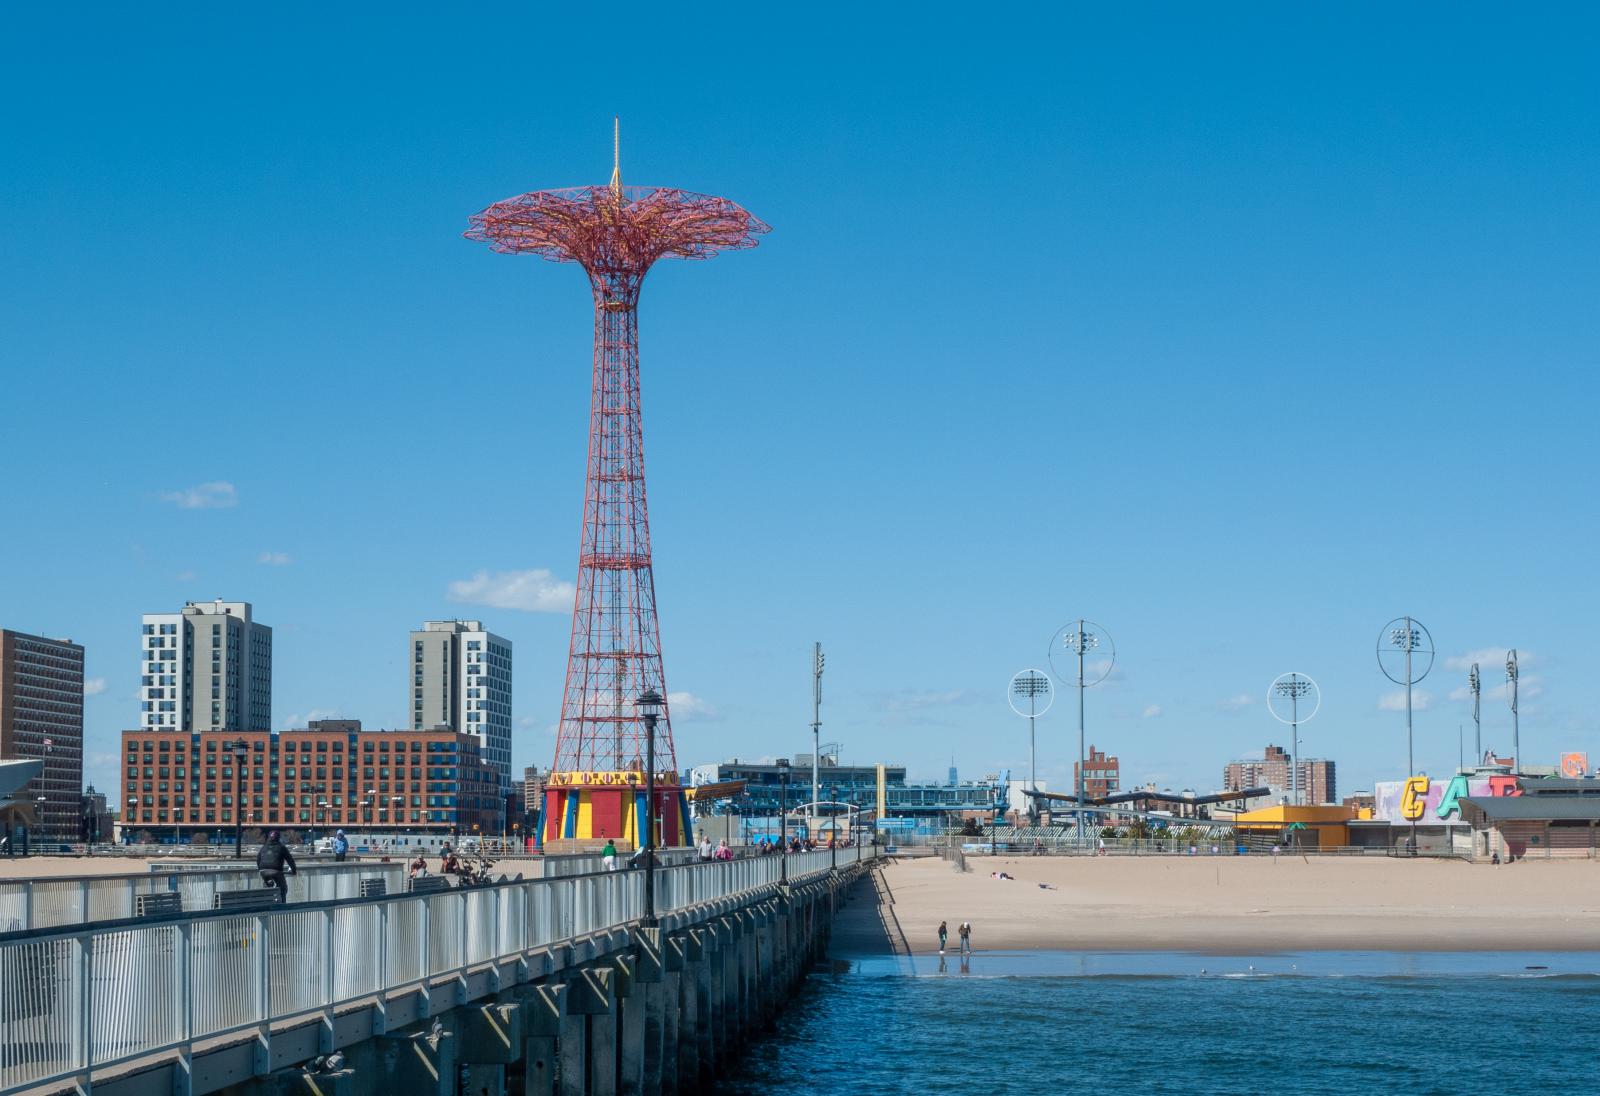 Parachute Jump From The Pier | Buy this image